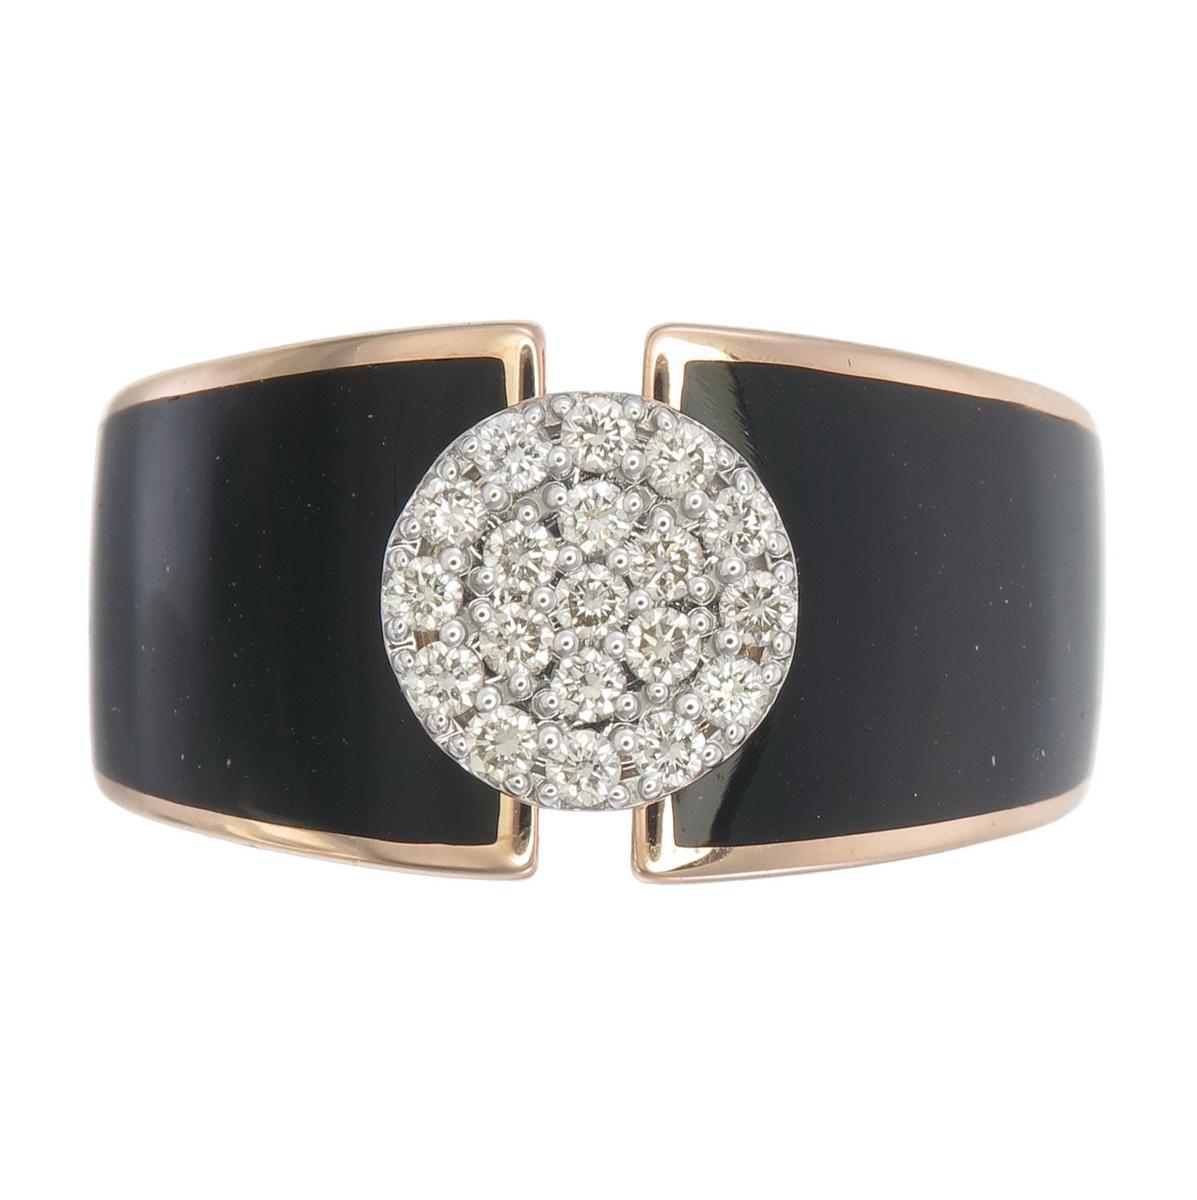 Ring made using  Black Ceramic n 18kt Pink gold & natural diamonds

3.78 grams of gold & 0.28 carat diamonds are used in this ring
